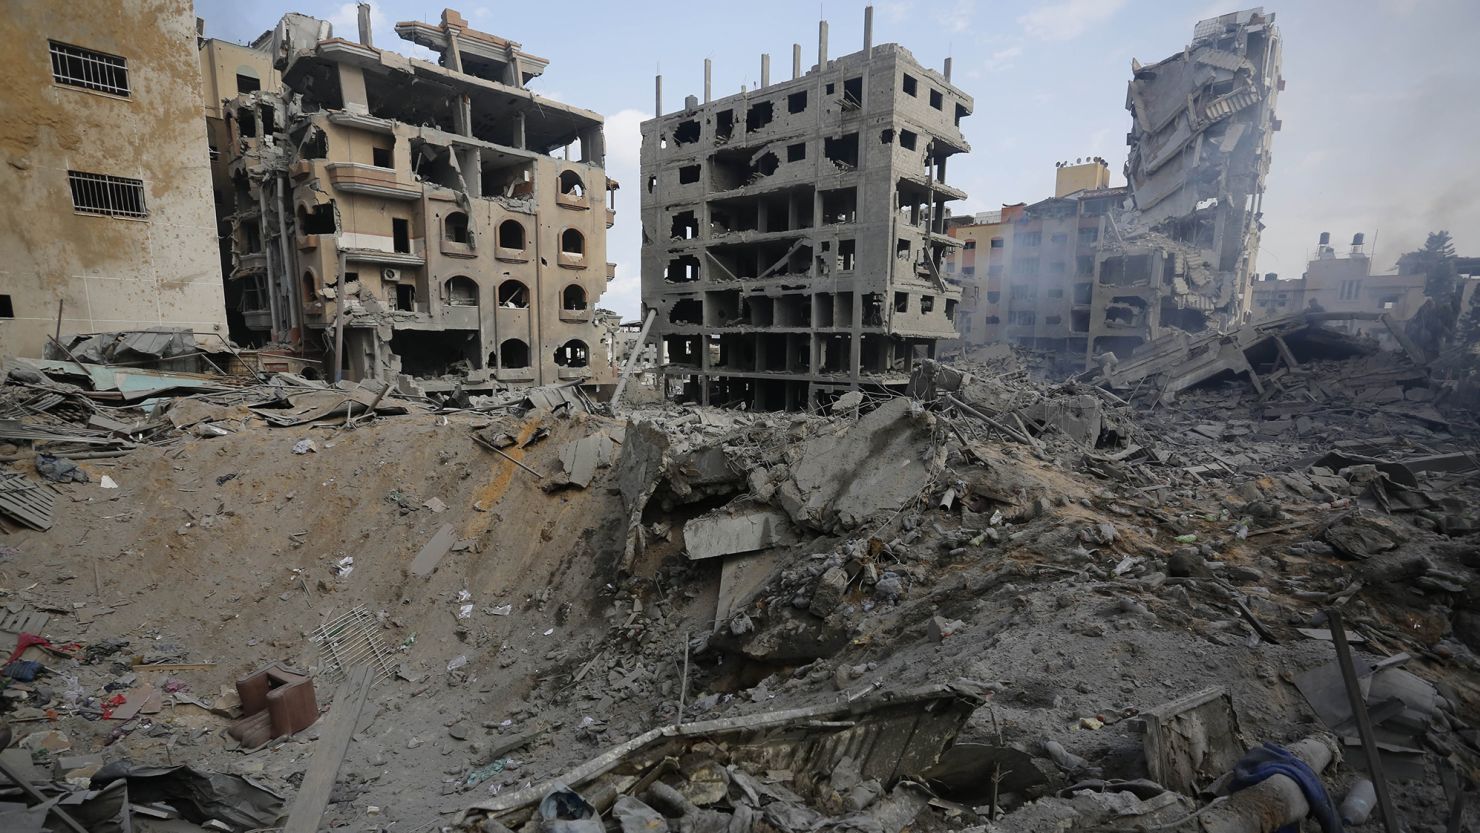 A view of destroyed buildings and debris at the al-Rimal neighborhood on Monday after Israeli airstrikes in Gaza.